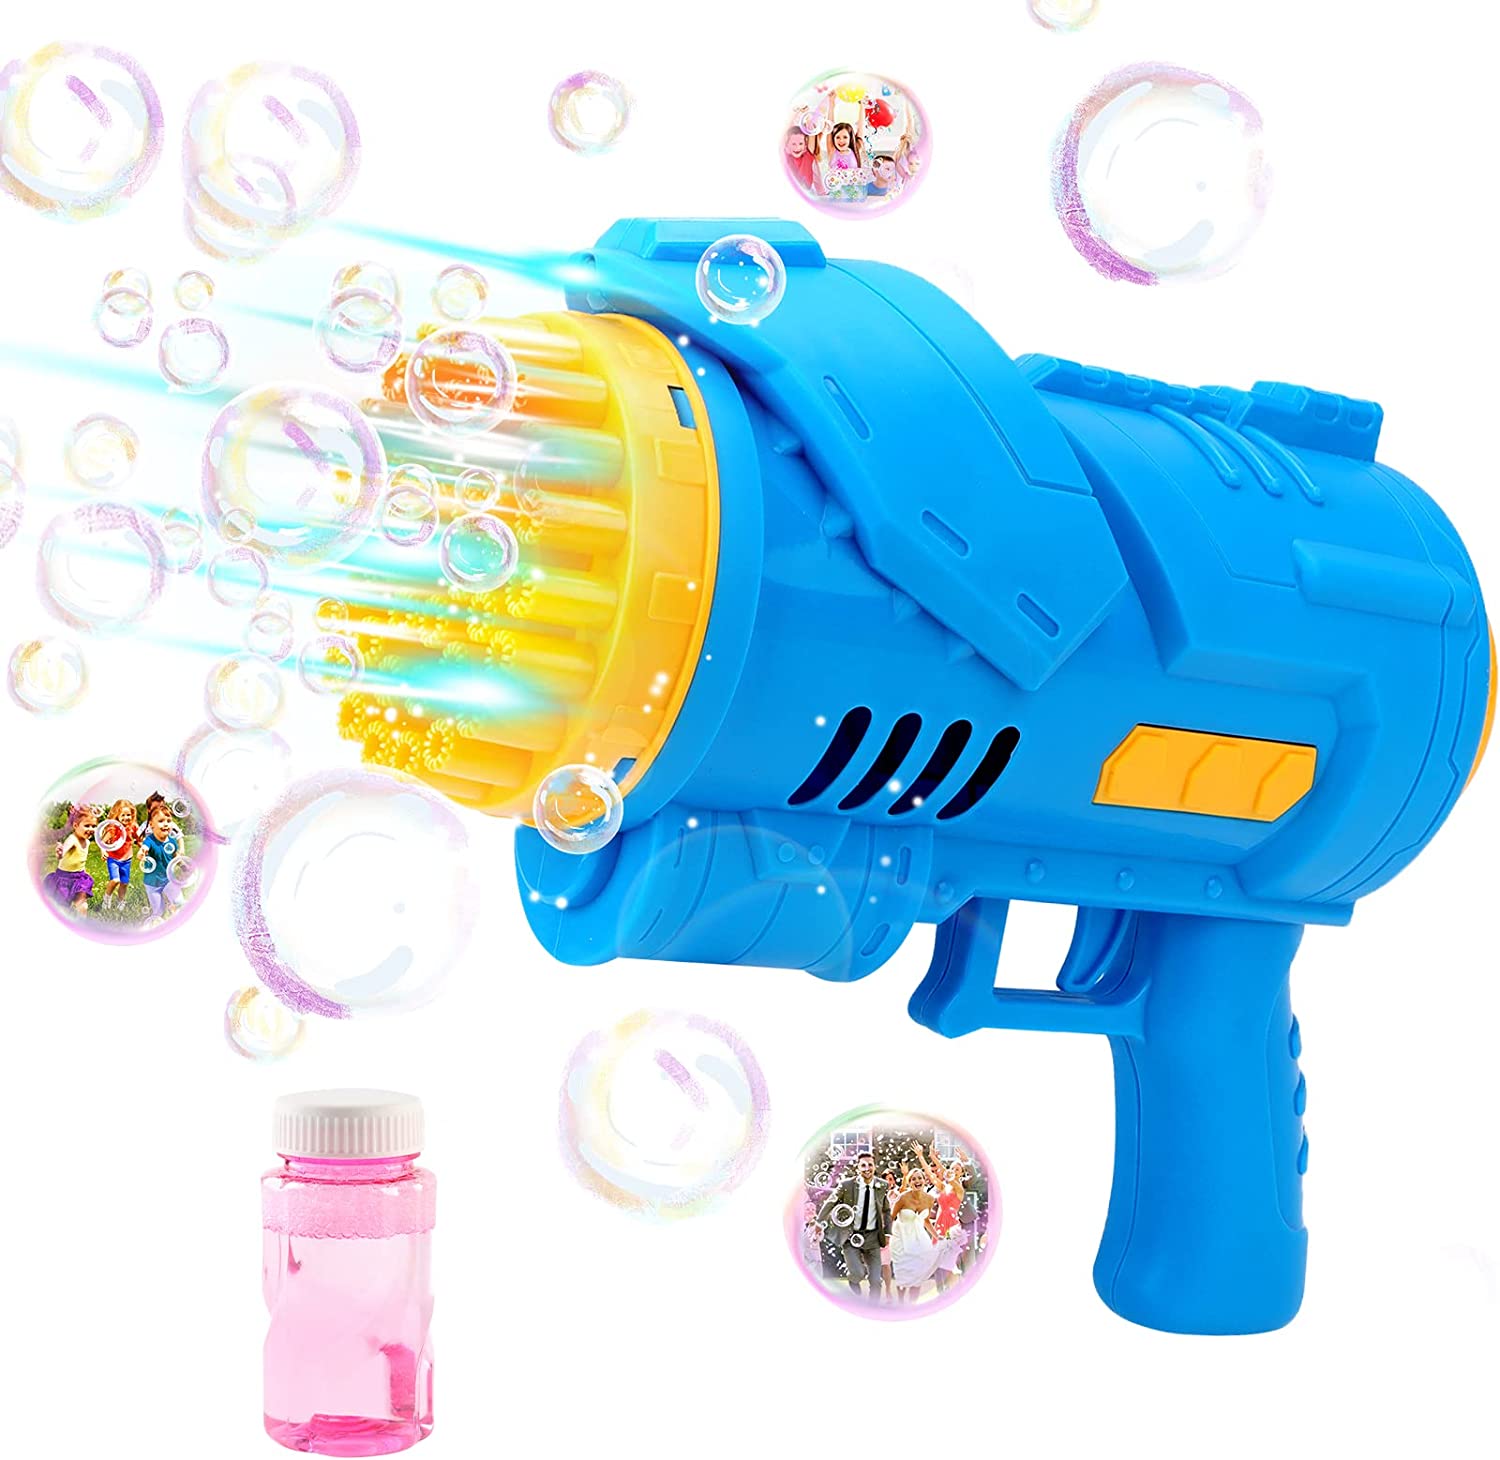 8 Holes Bubble Gun, Bubble Machine With Rich Bubbles, Bubble Guns For Kids,  Automatic Bubble Gun For Toddlers, Party Favors, Birthday Gift